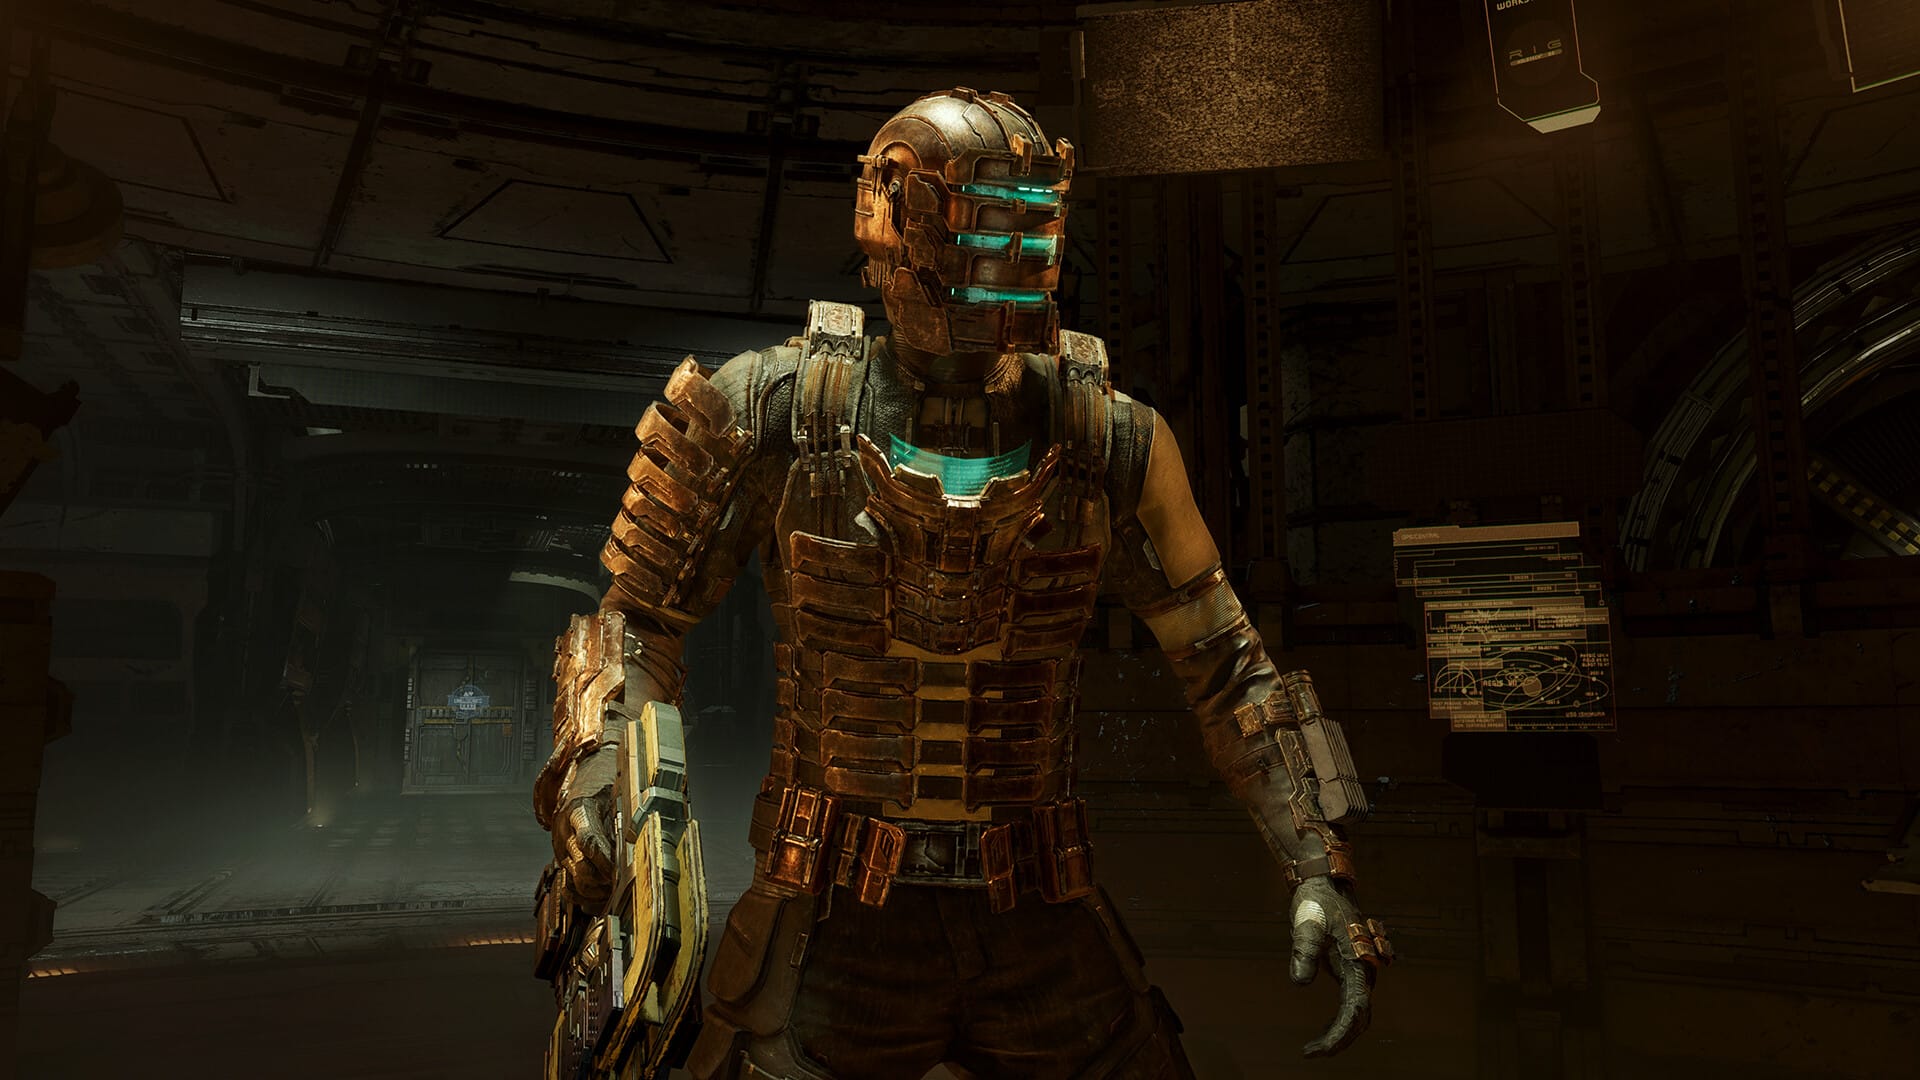 Dead Space (2023) Reviews - OpenCritic